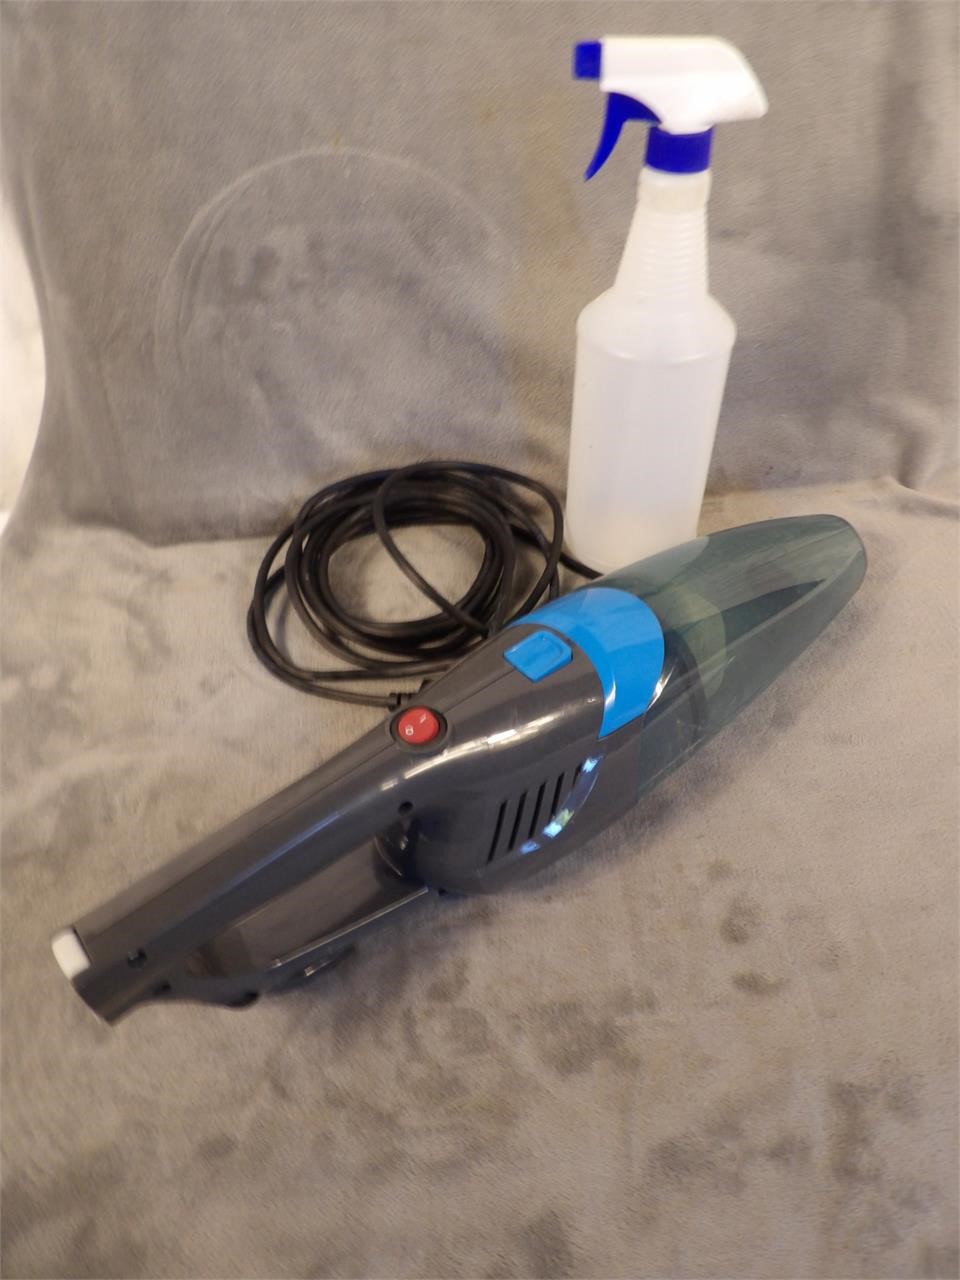 Bissell handheld Vaccuum and spray bottle